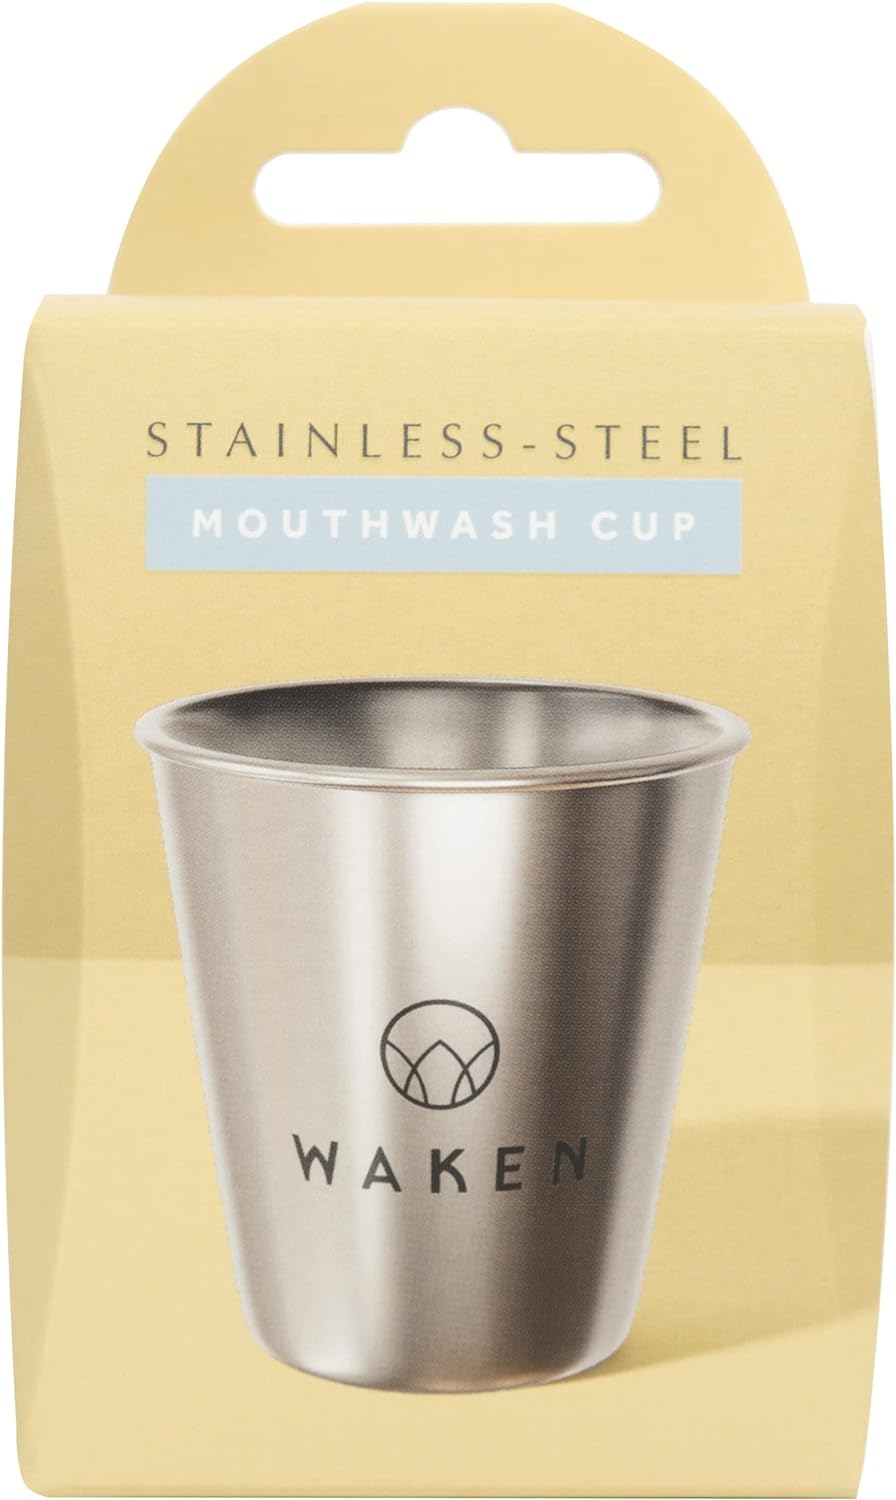 Waken Stainless Steel Mouthwash Cup, 20 ml 20284